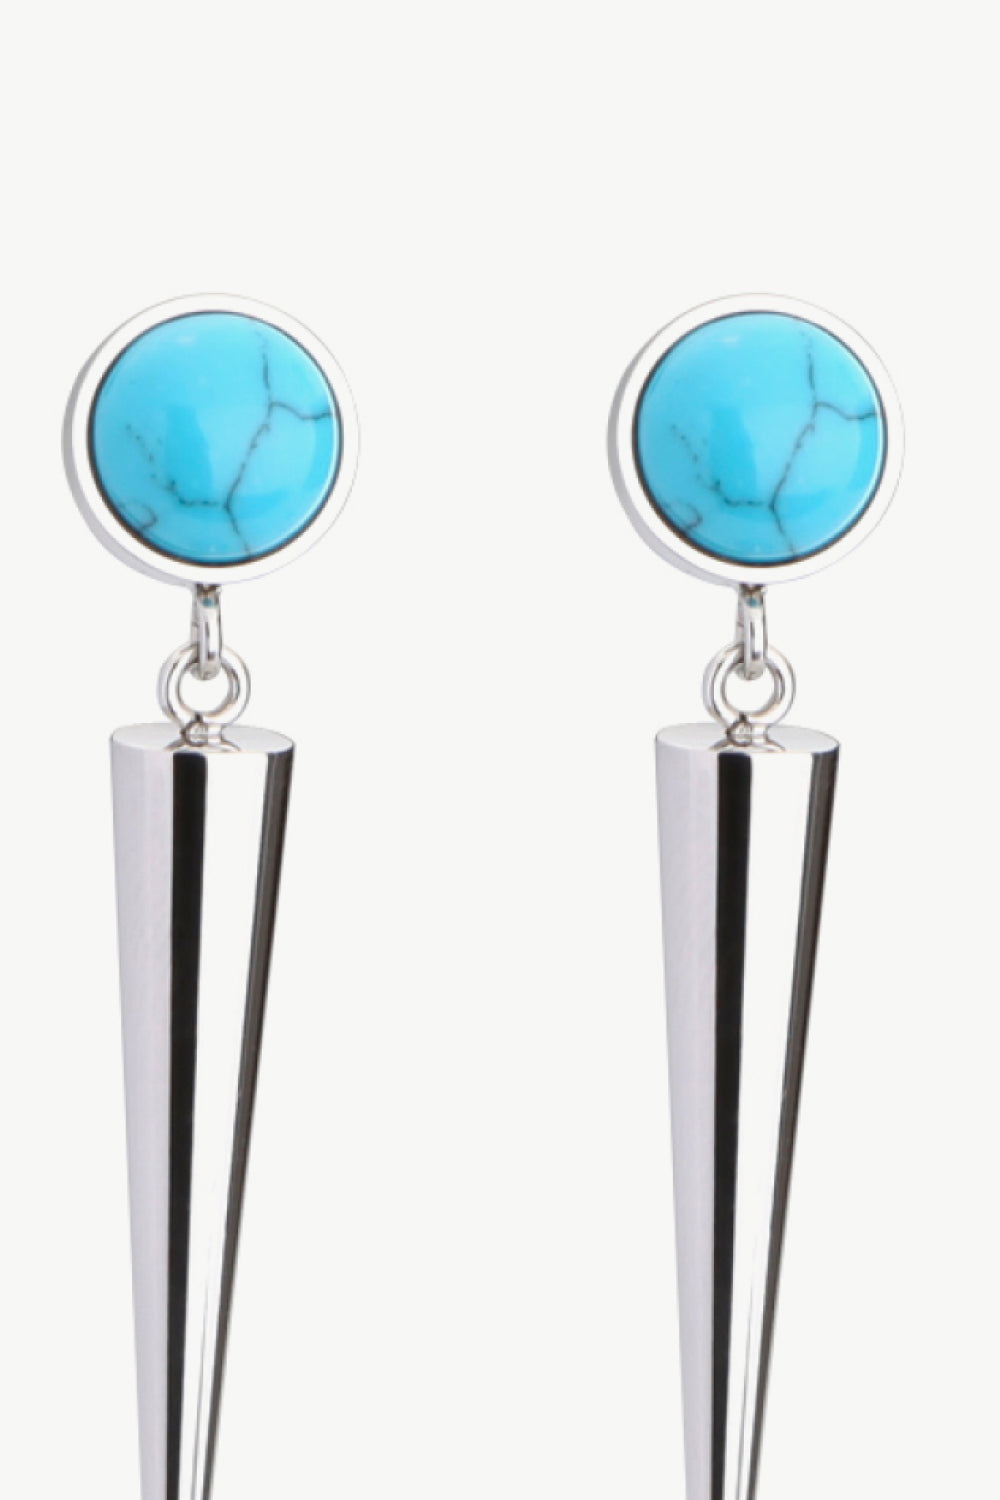 18K Stainless Steel Turquoise Drop Earrings The Stout Steer